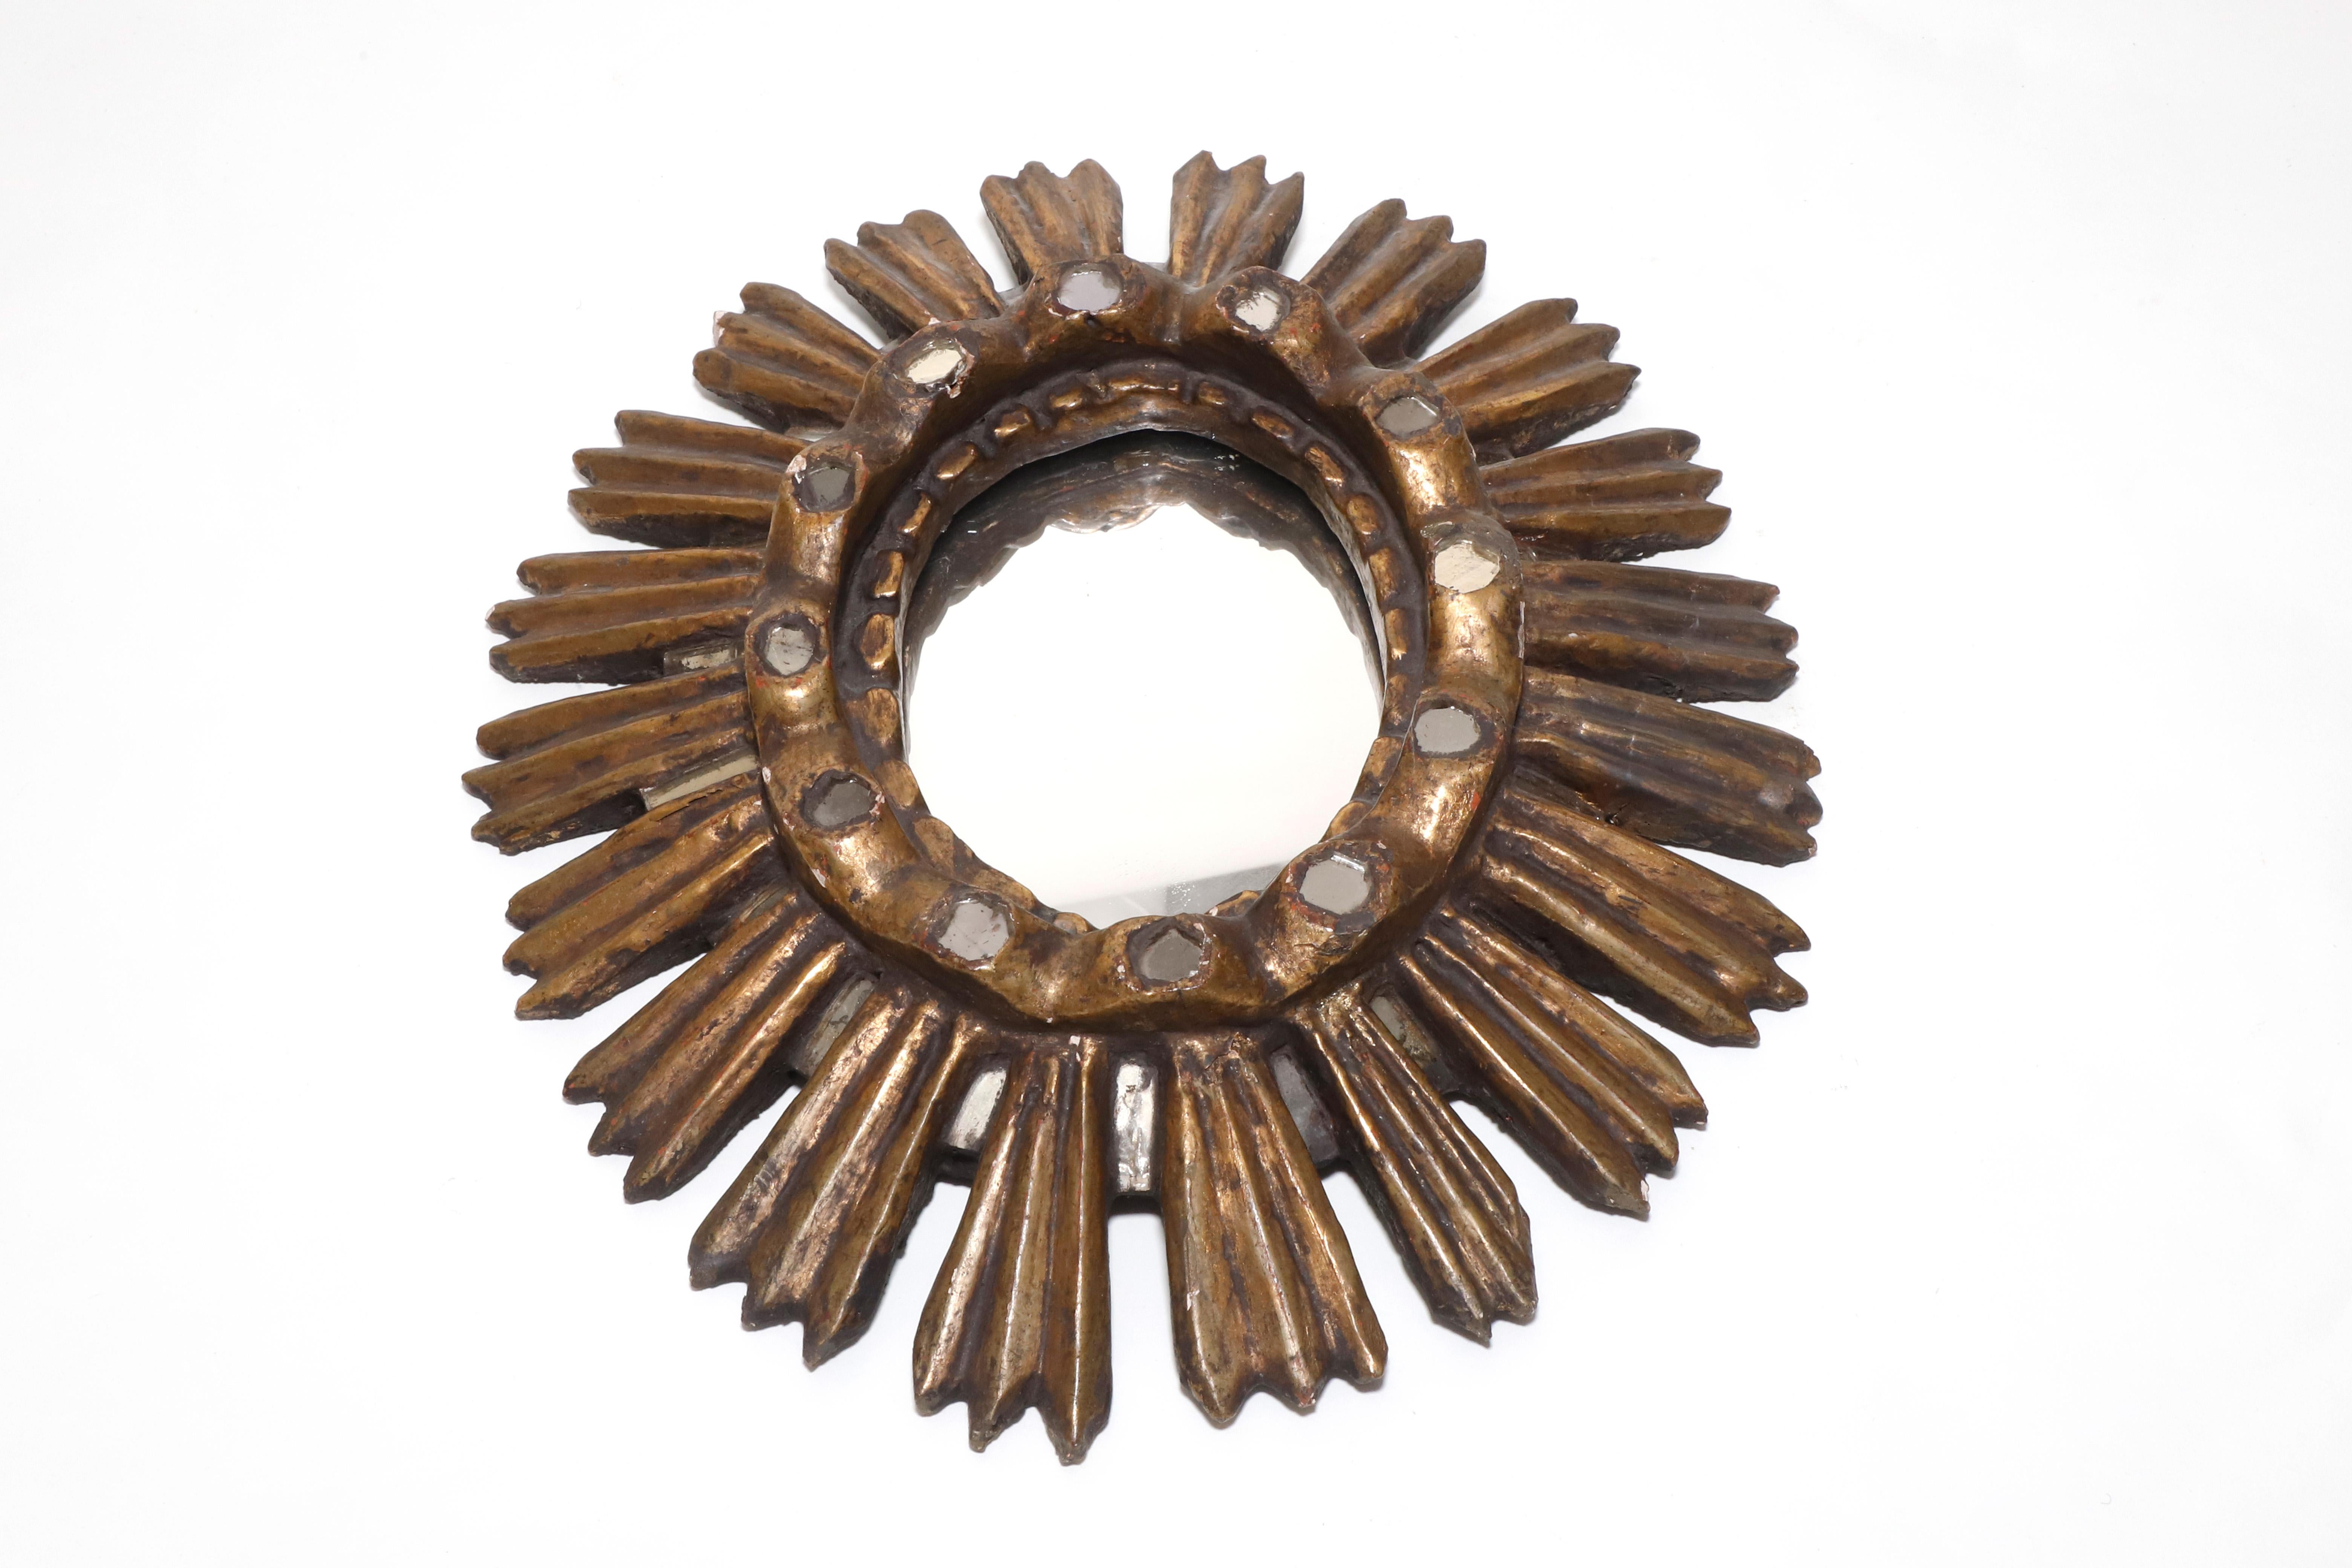 Spanish Colonial giltwood sunburst oval mirror. Beautiful hand carved piece with small circled mirror details arround the the main center oval mirror plate. Circa 1940s. Natural Patina.

Property from esteemed interior designer Juan Montoya. Juan